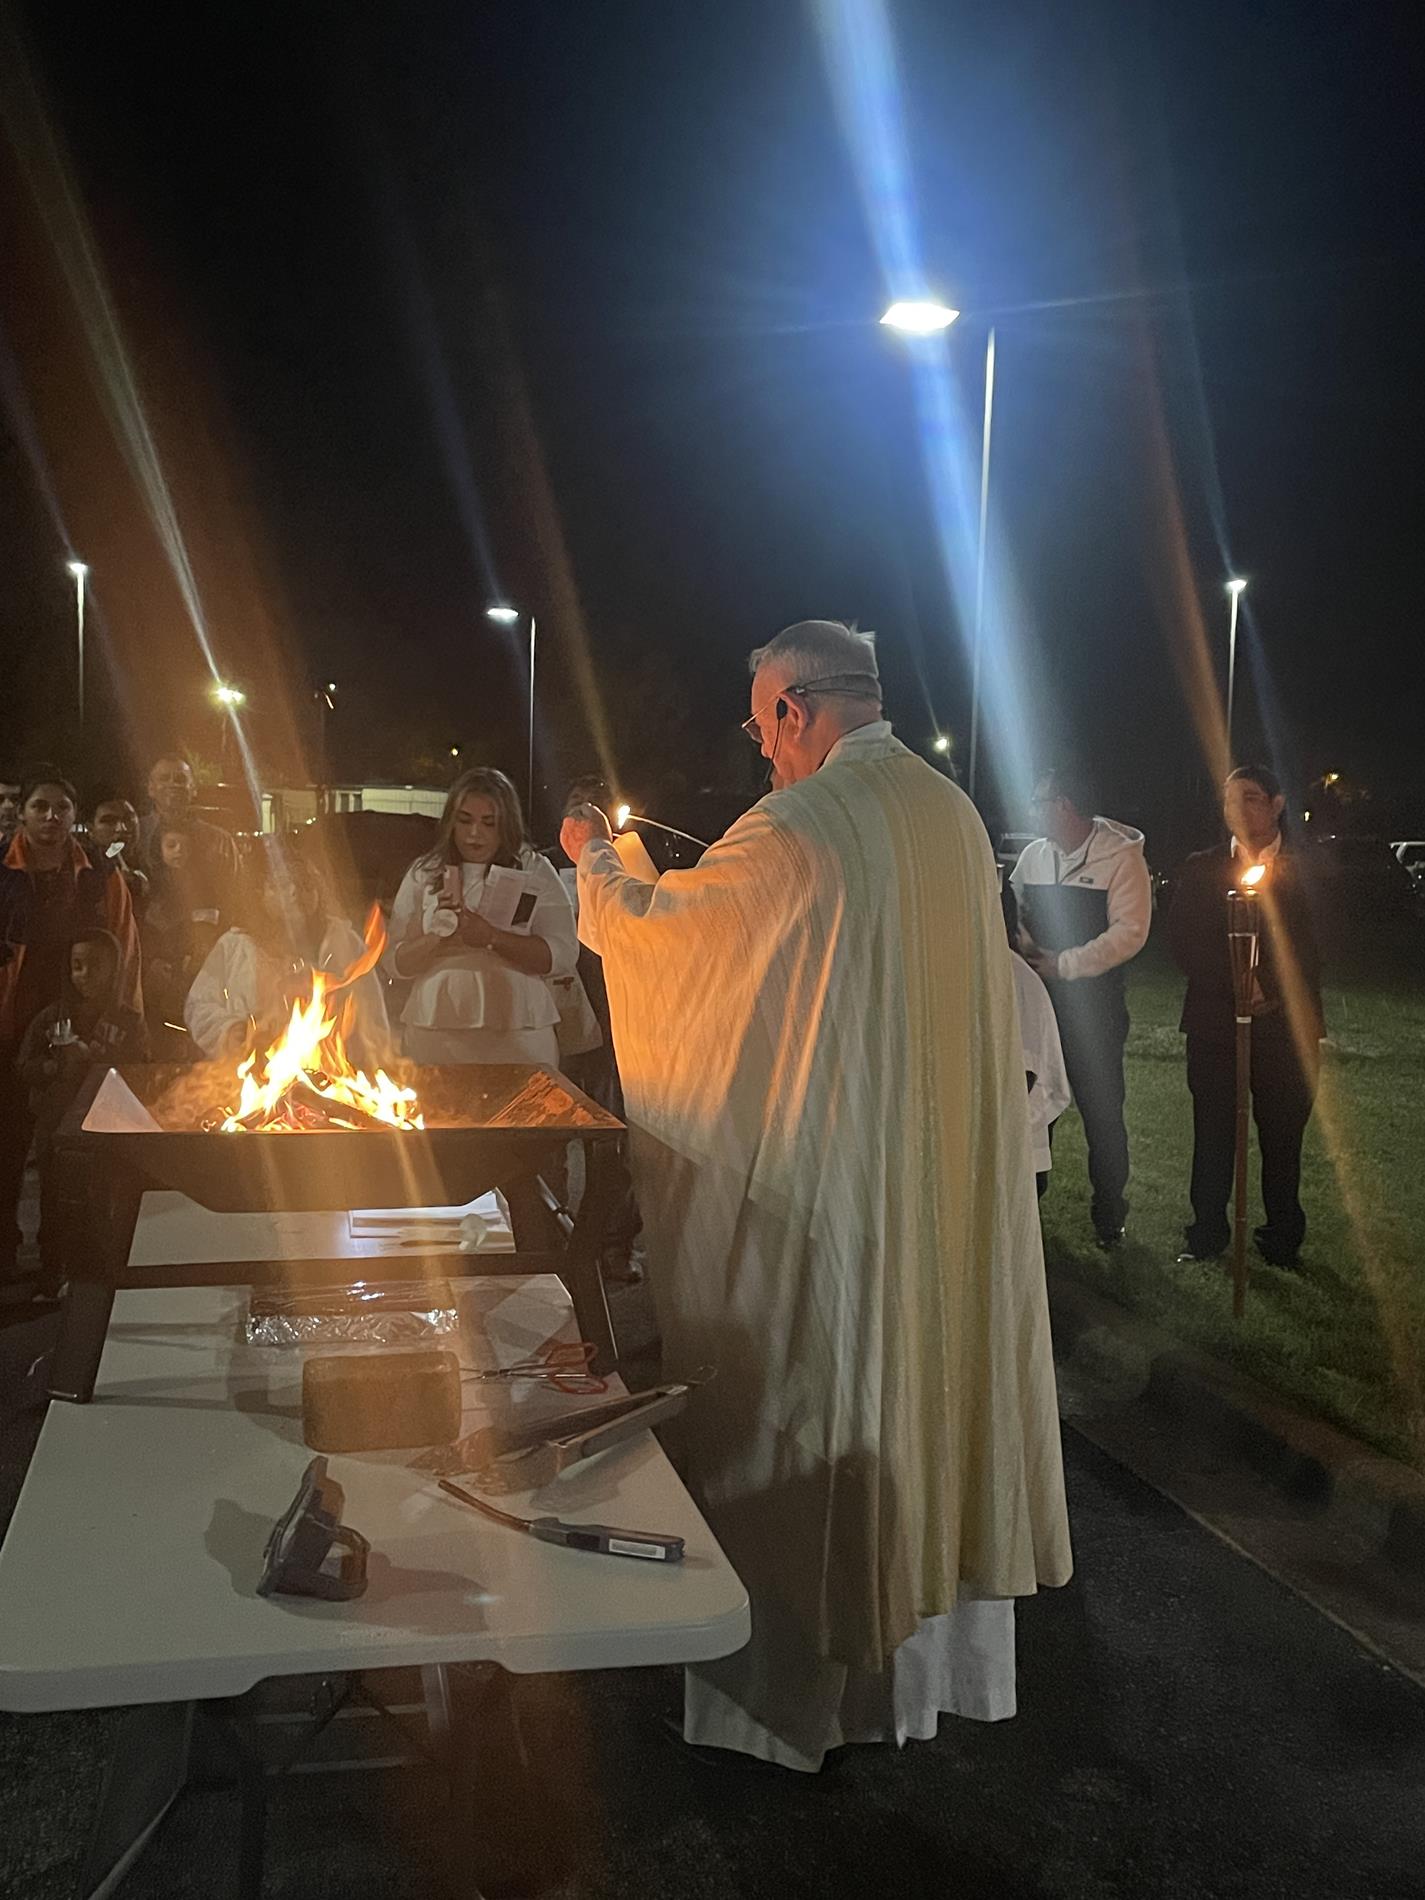 Father Wayne lights the Easter Candle from the Easter fire